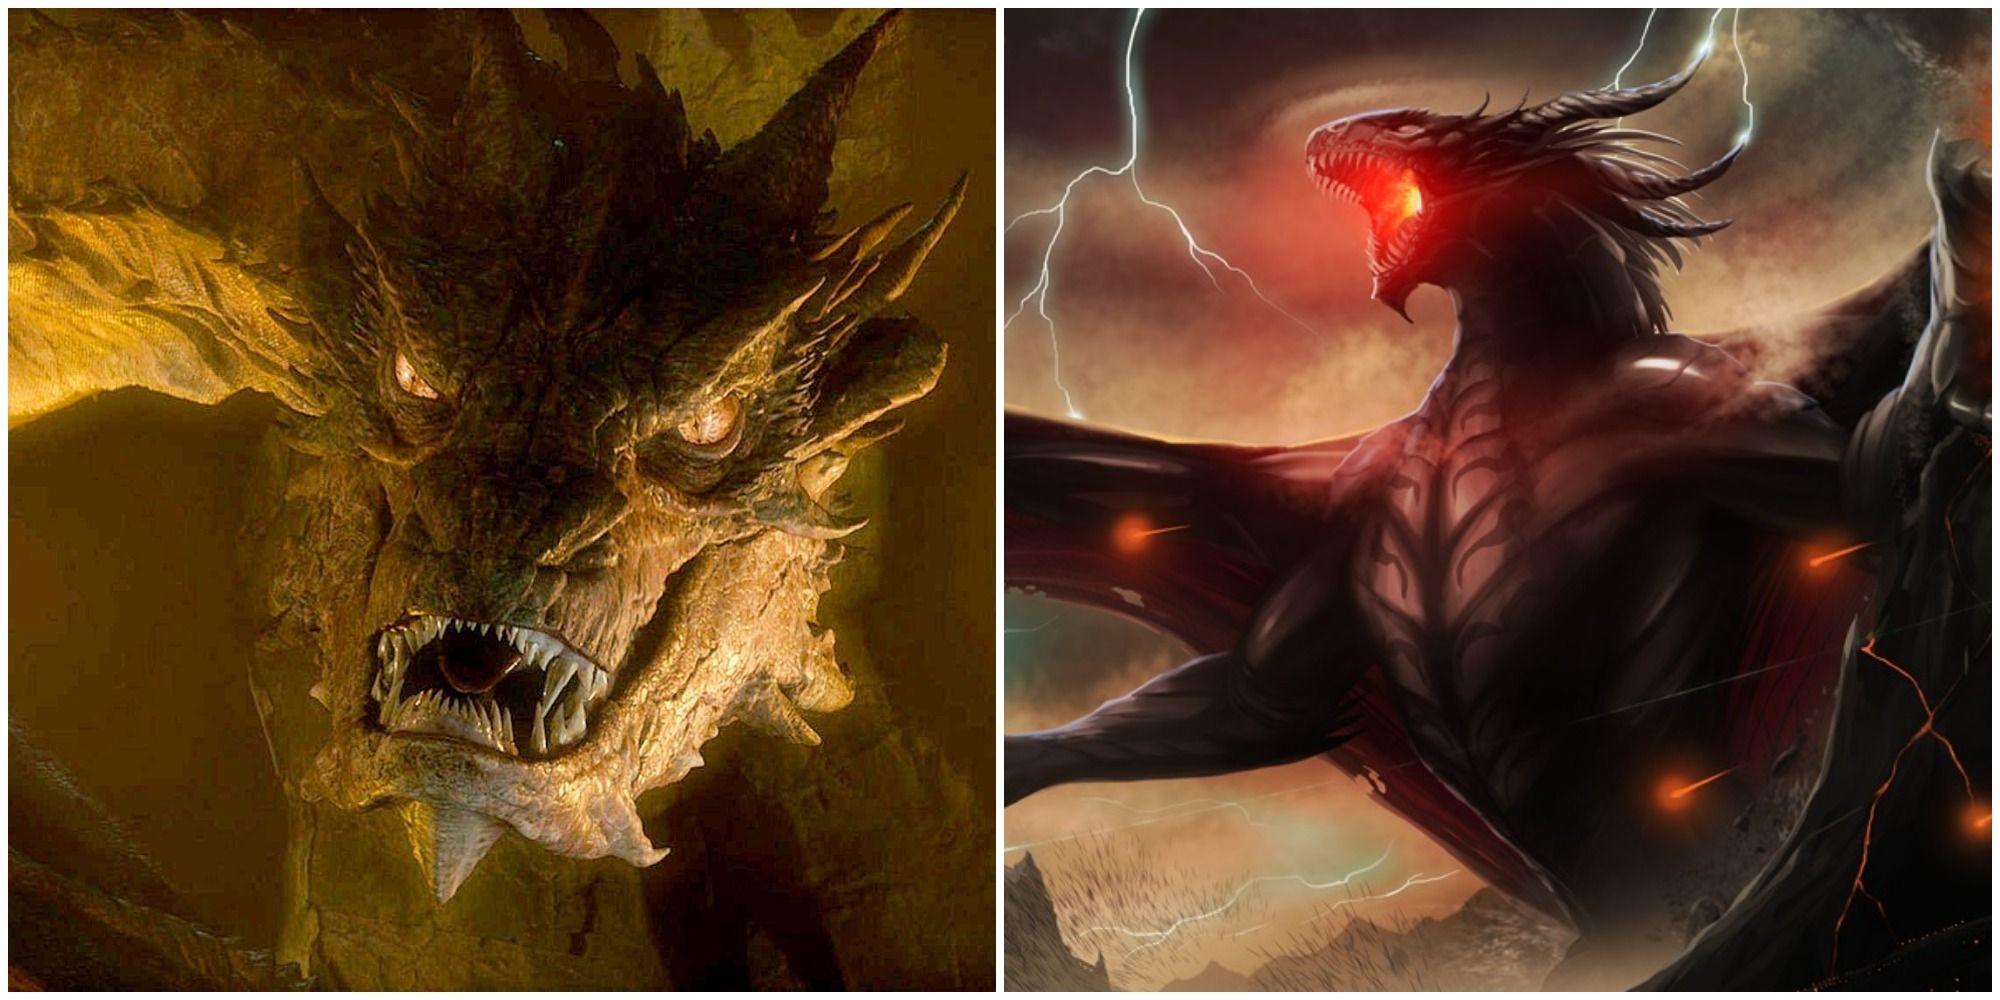 Comparison of the Dragons of Middle-Earth